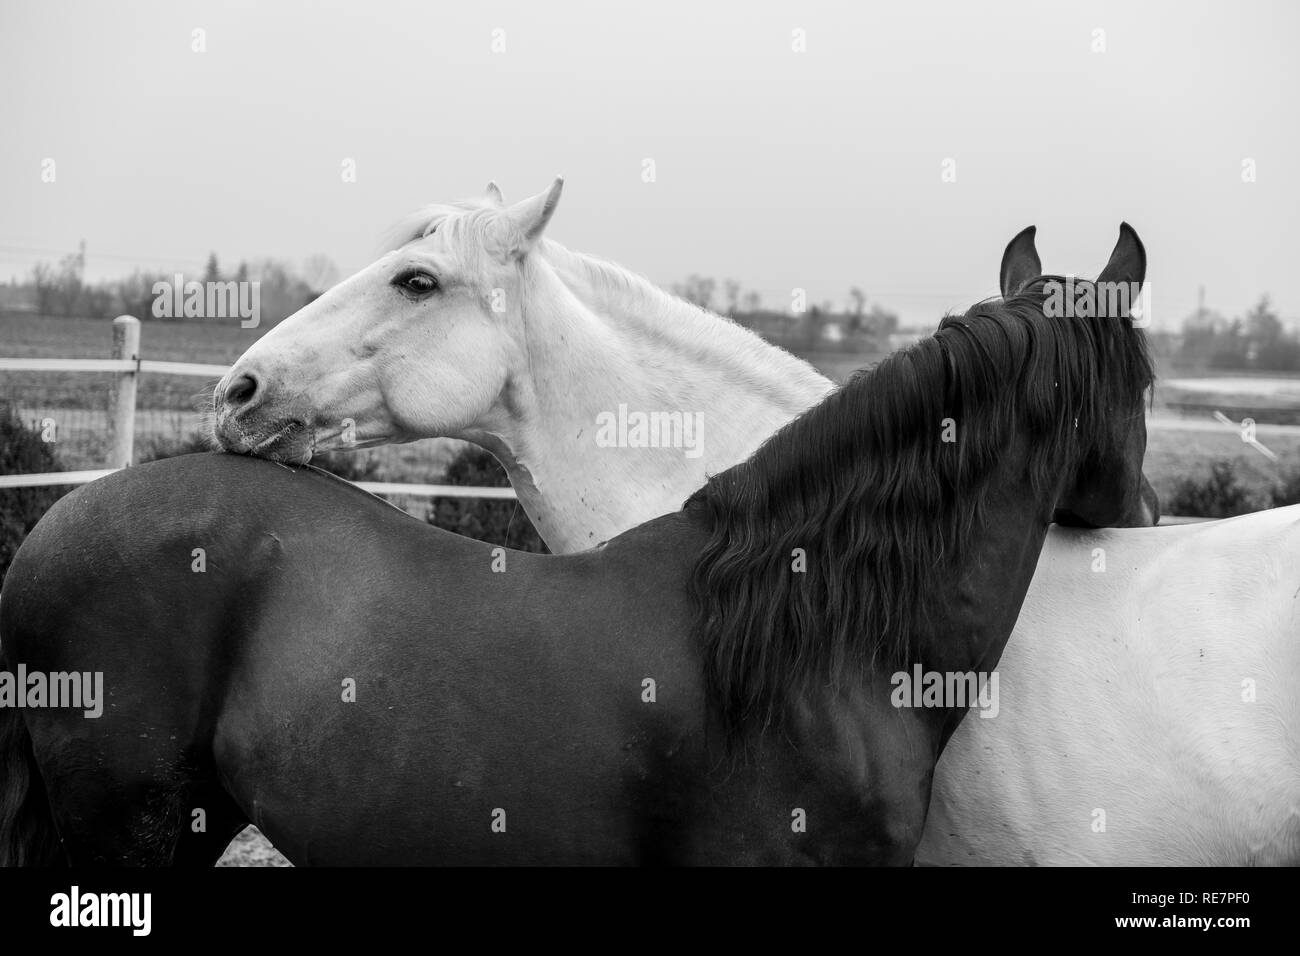 Two horses, one white and one black, playing, eating and having fun together. Horses of different colors in the wild. Stock Photo